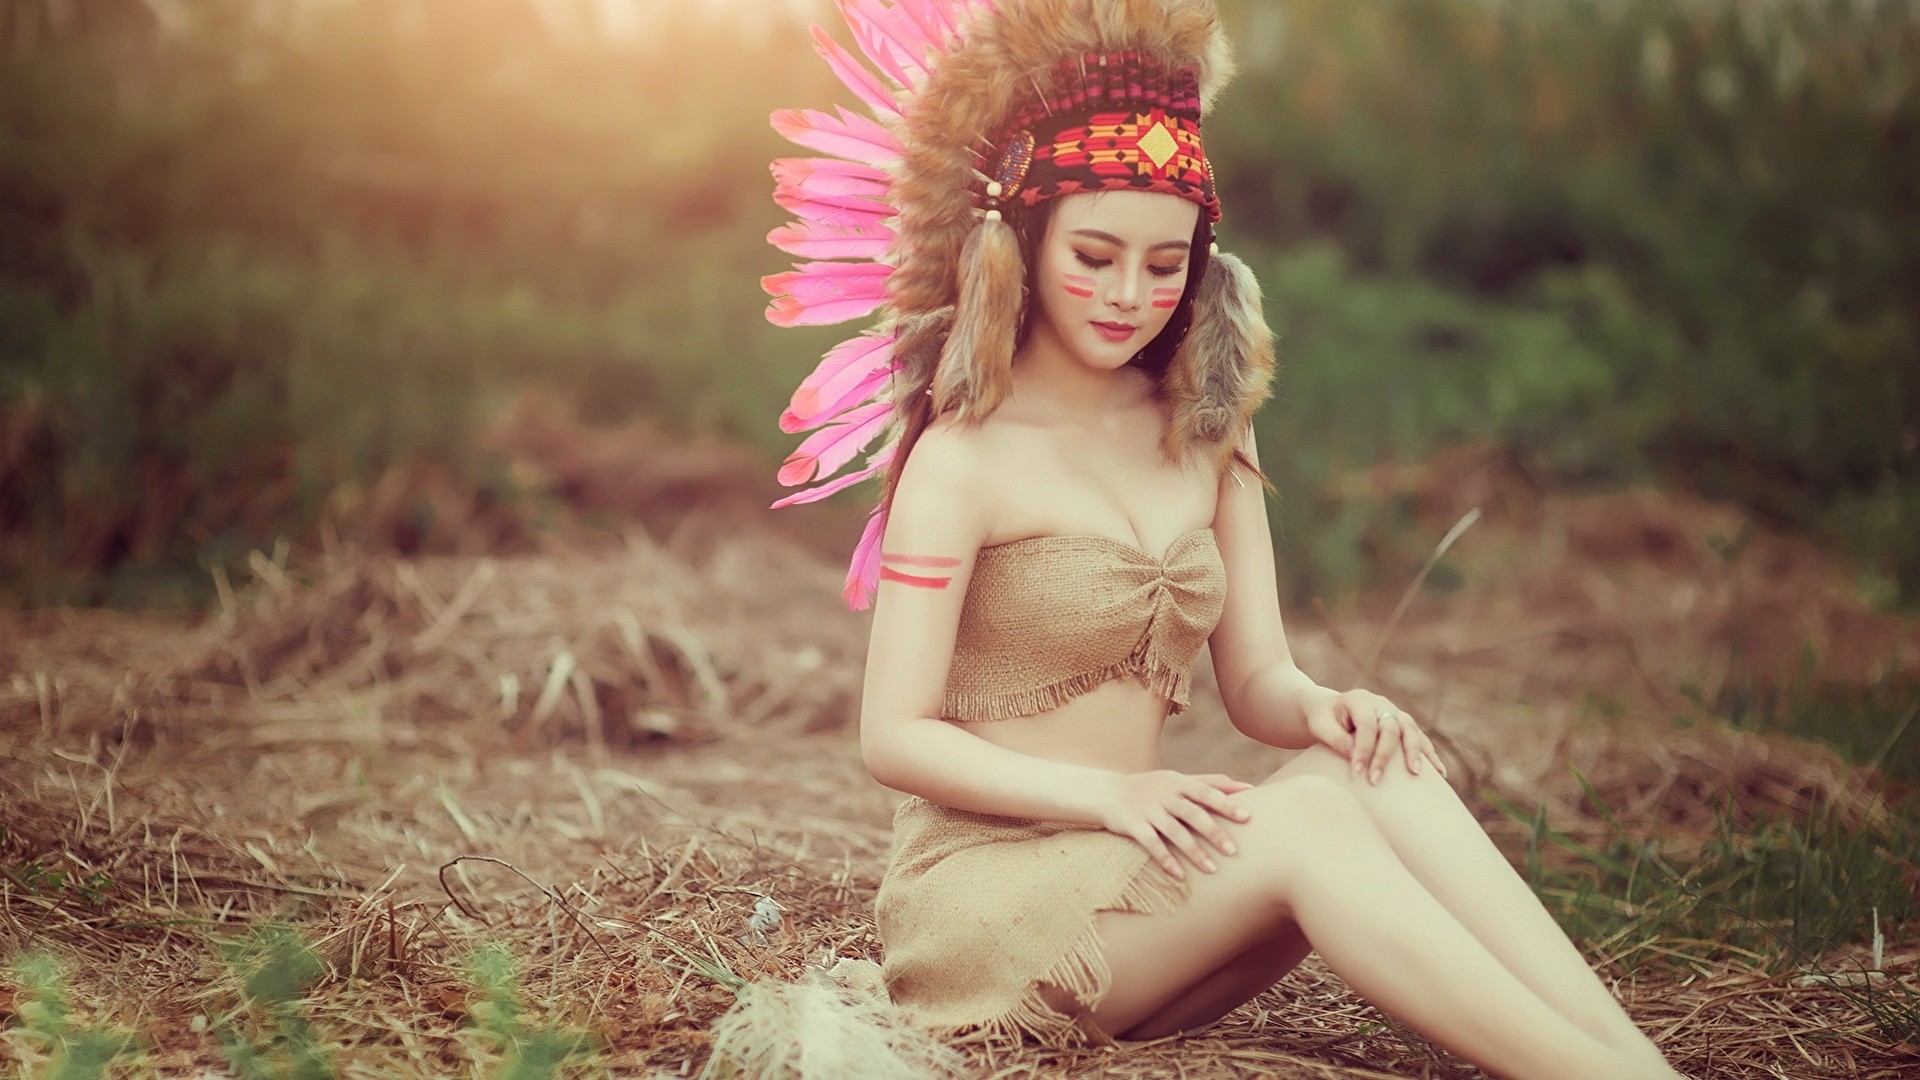 1920x1080 Wallpaper Indians Beautiful Girls Legs Feathers Sitting   Indigenous peoples